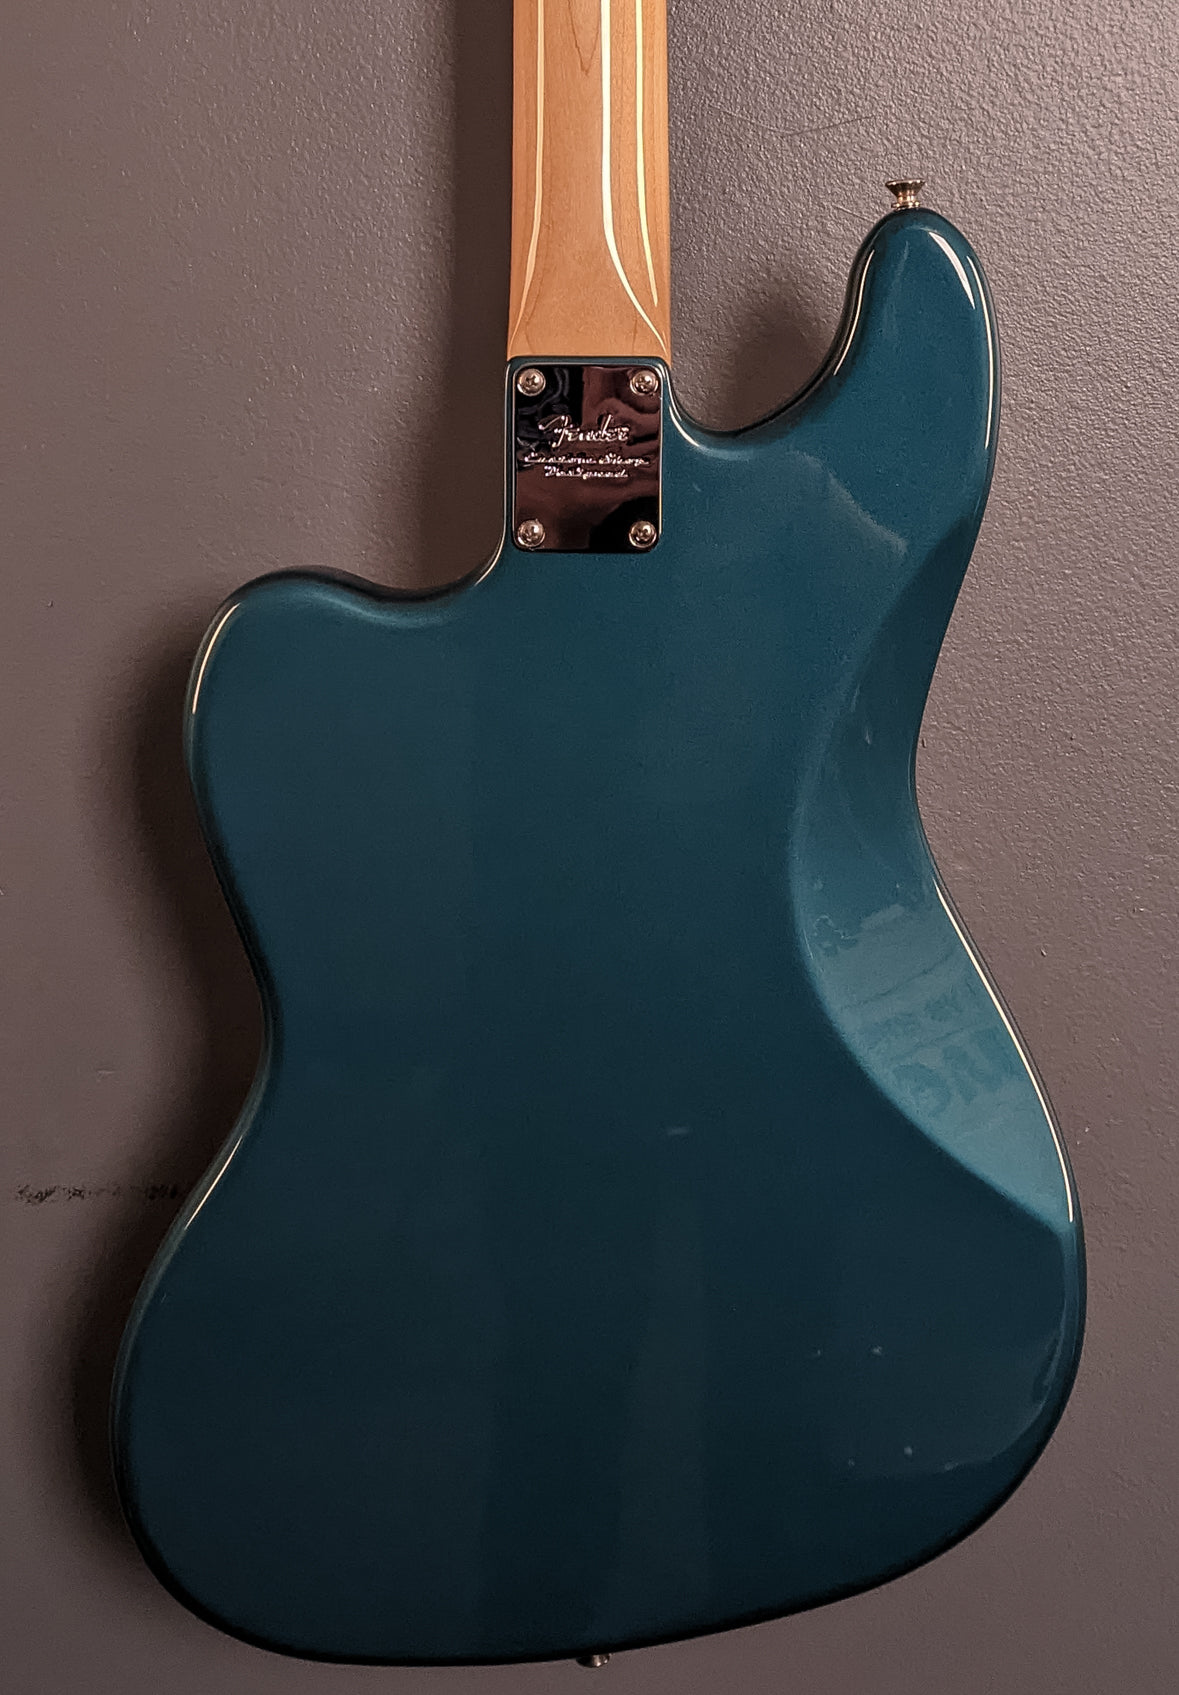 USED Classic Player Rascal Bass, '14